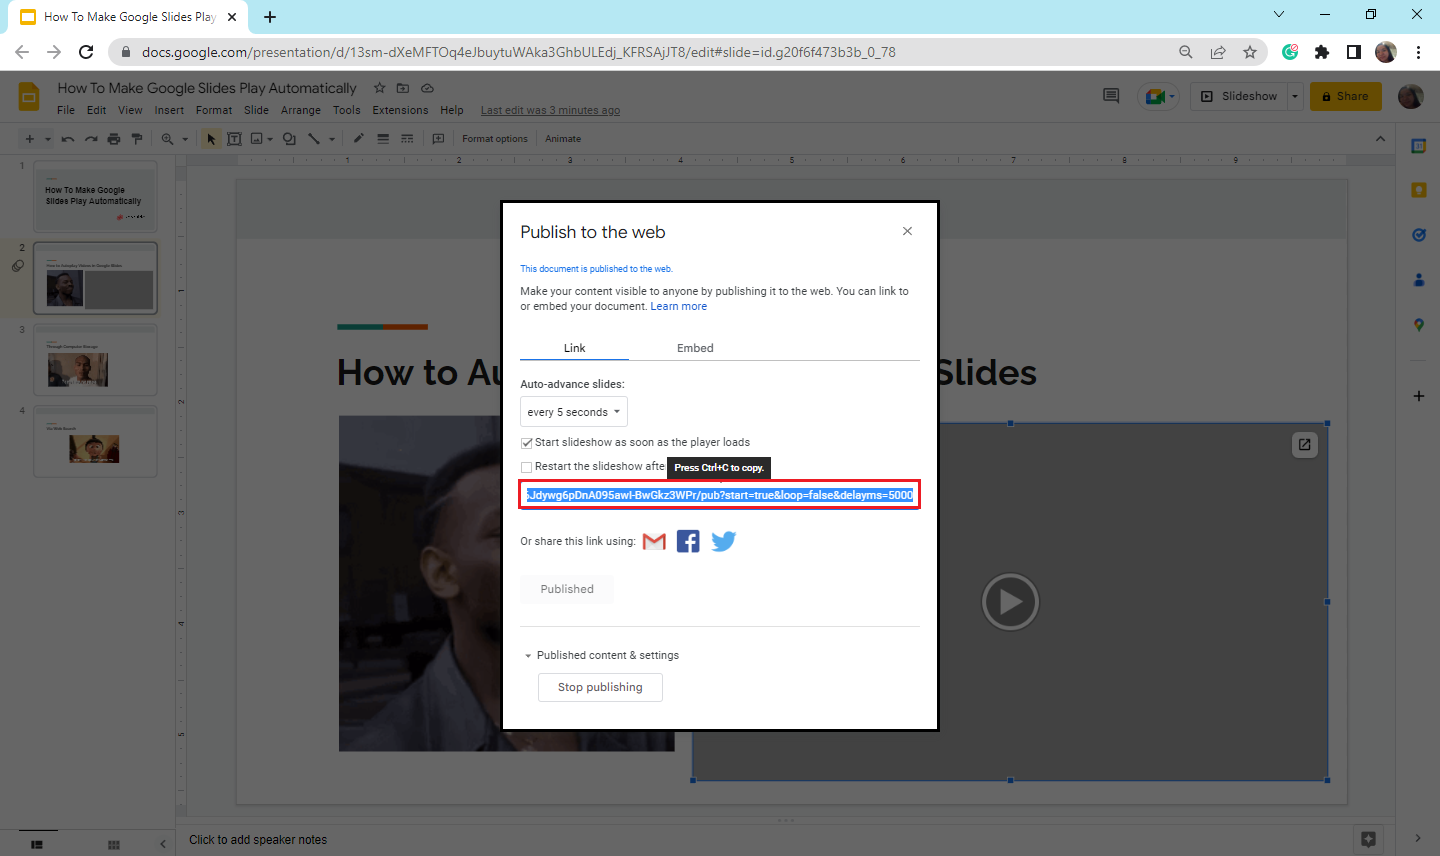 Once you published presentation, you can copy and paste the generated link